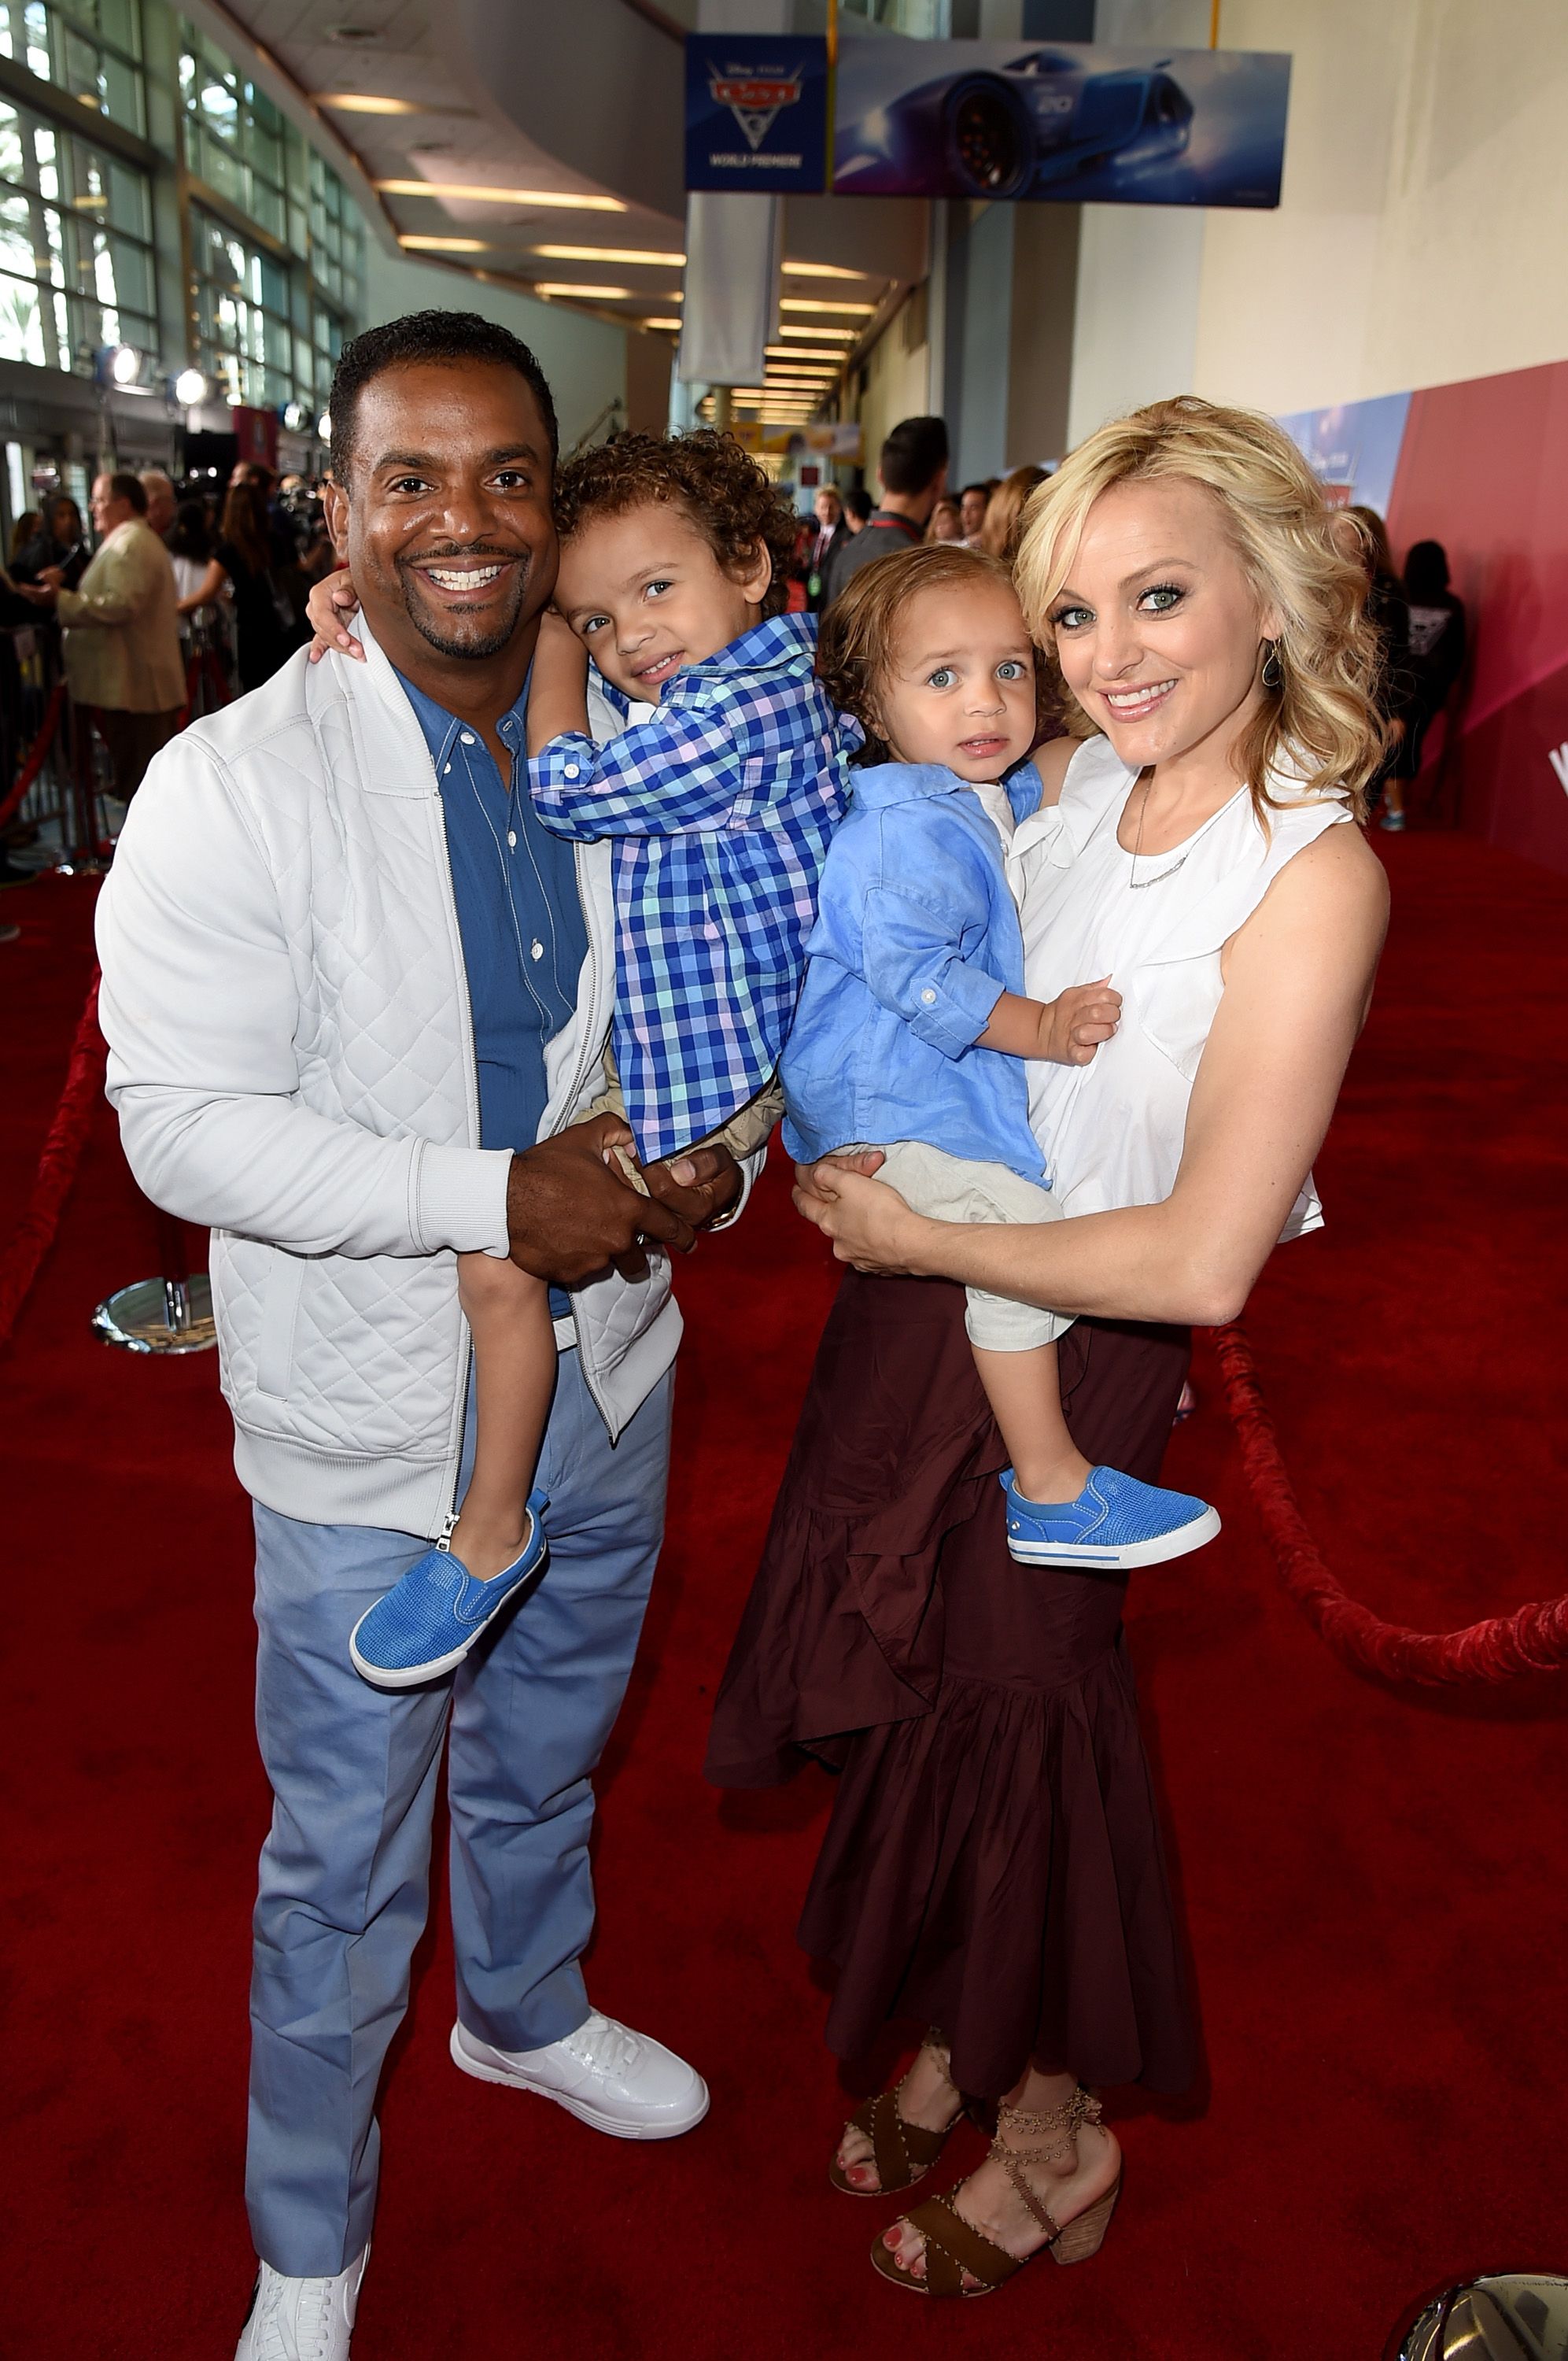 Alfonso Ribeiro, Angela Unkrich and family at the premiere of Disney and Pixar's "Cars 3" at Anaheim Convention Center on June 10, 2017 | Photo: Getty Images